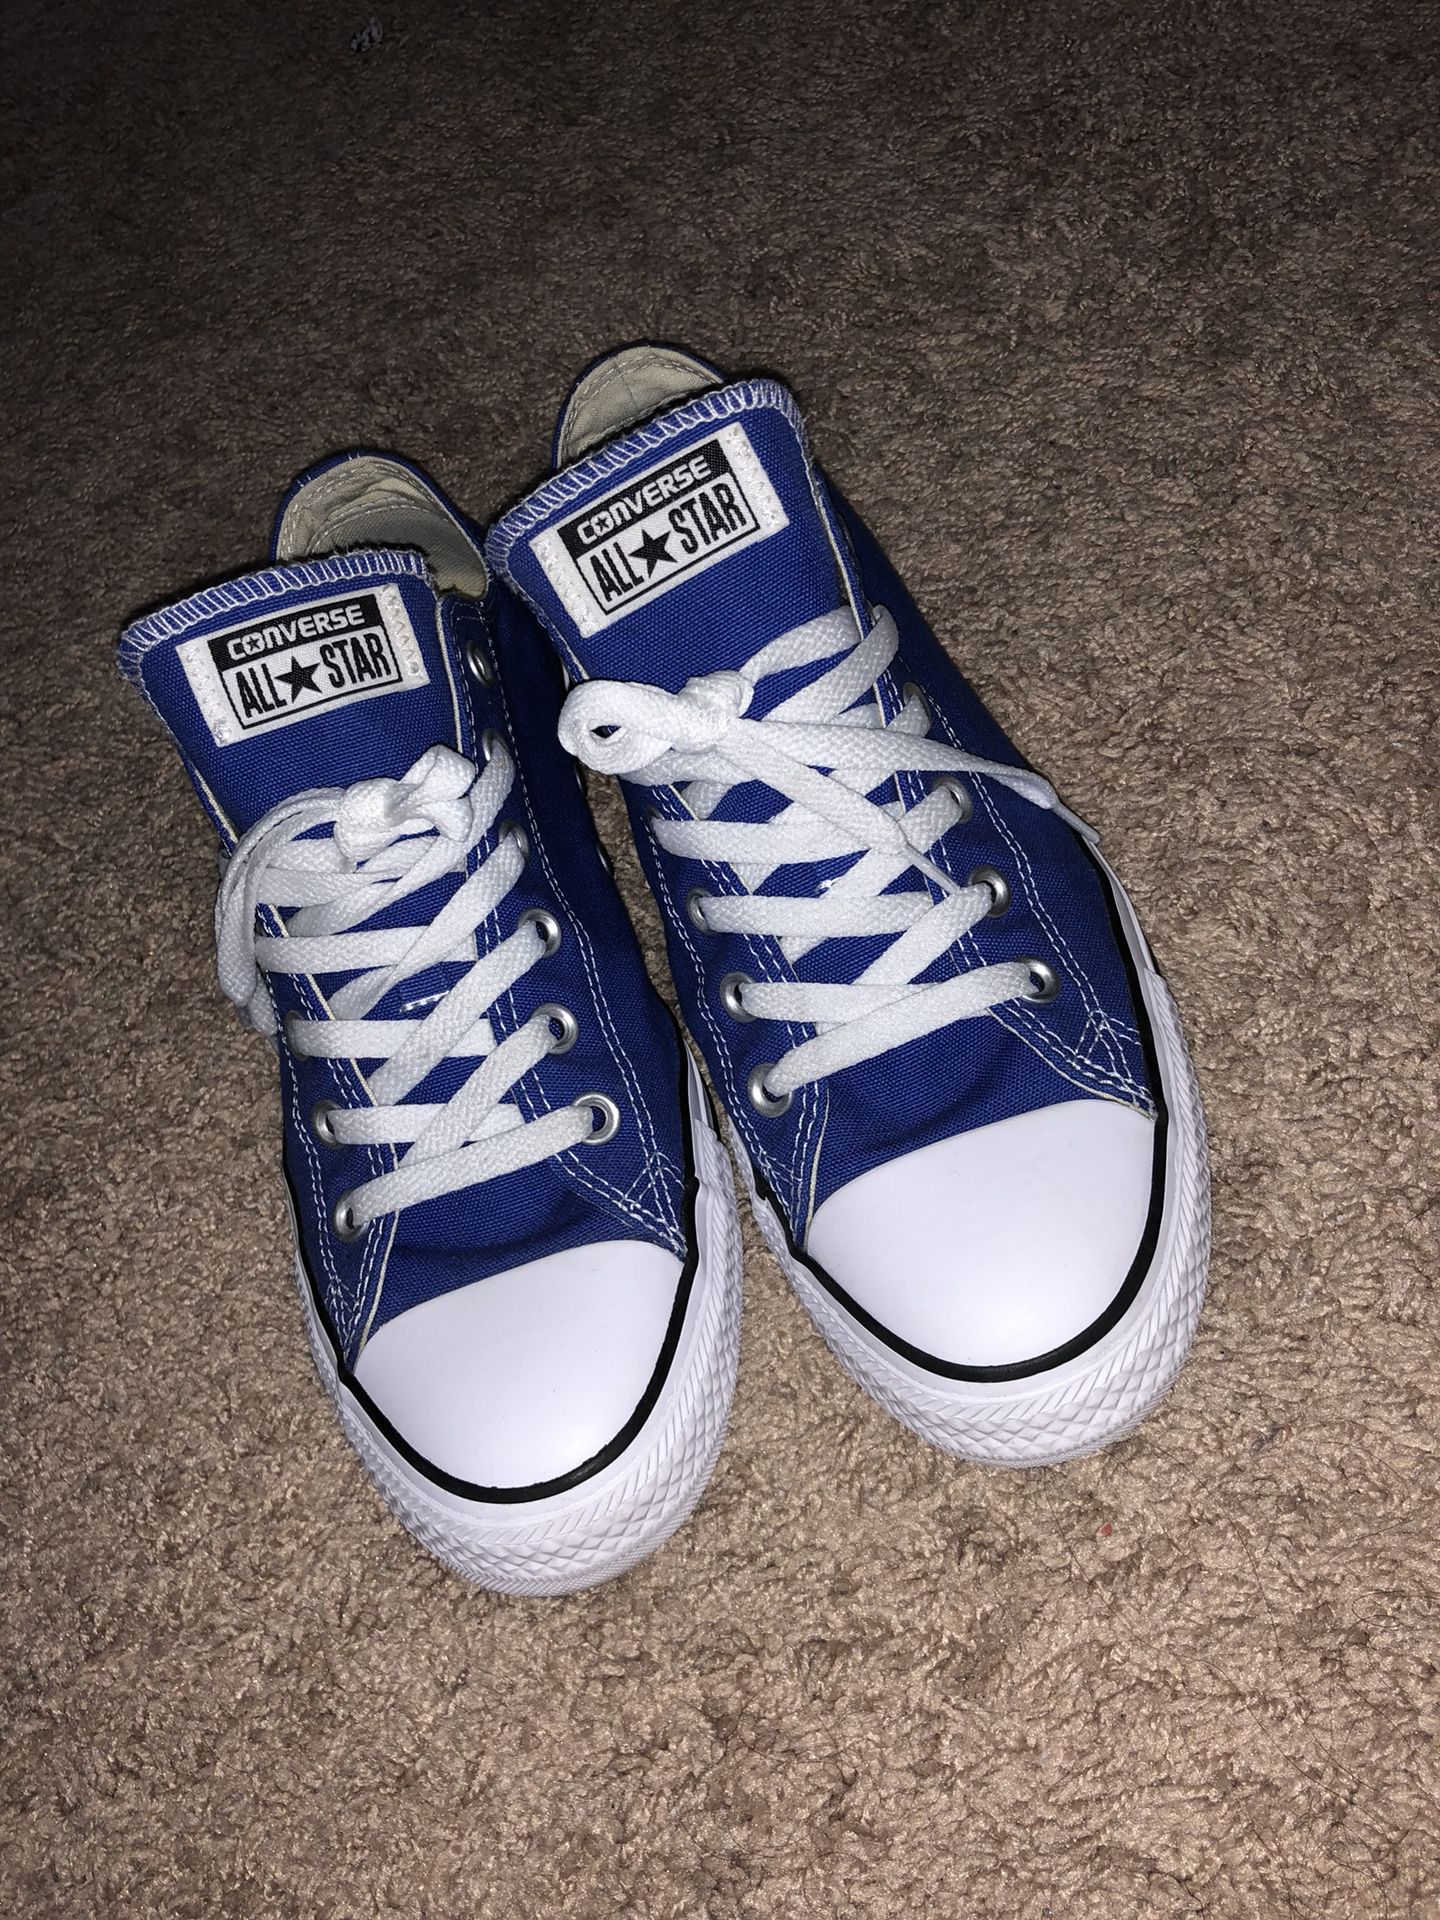 Fryse digital passe Royal blue converse chuck Taylor for Sale in Tampa, FL - OfferUp